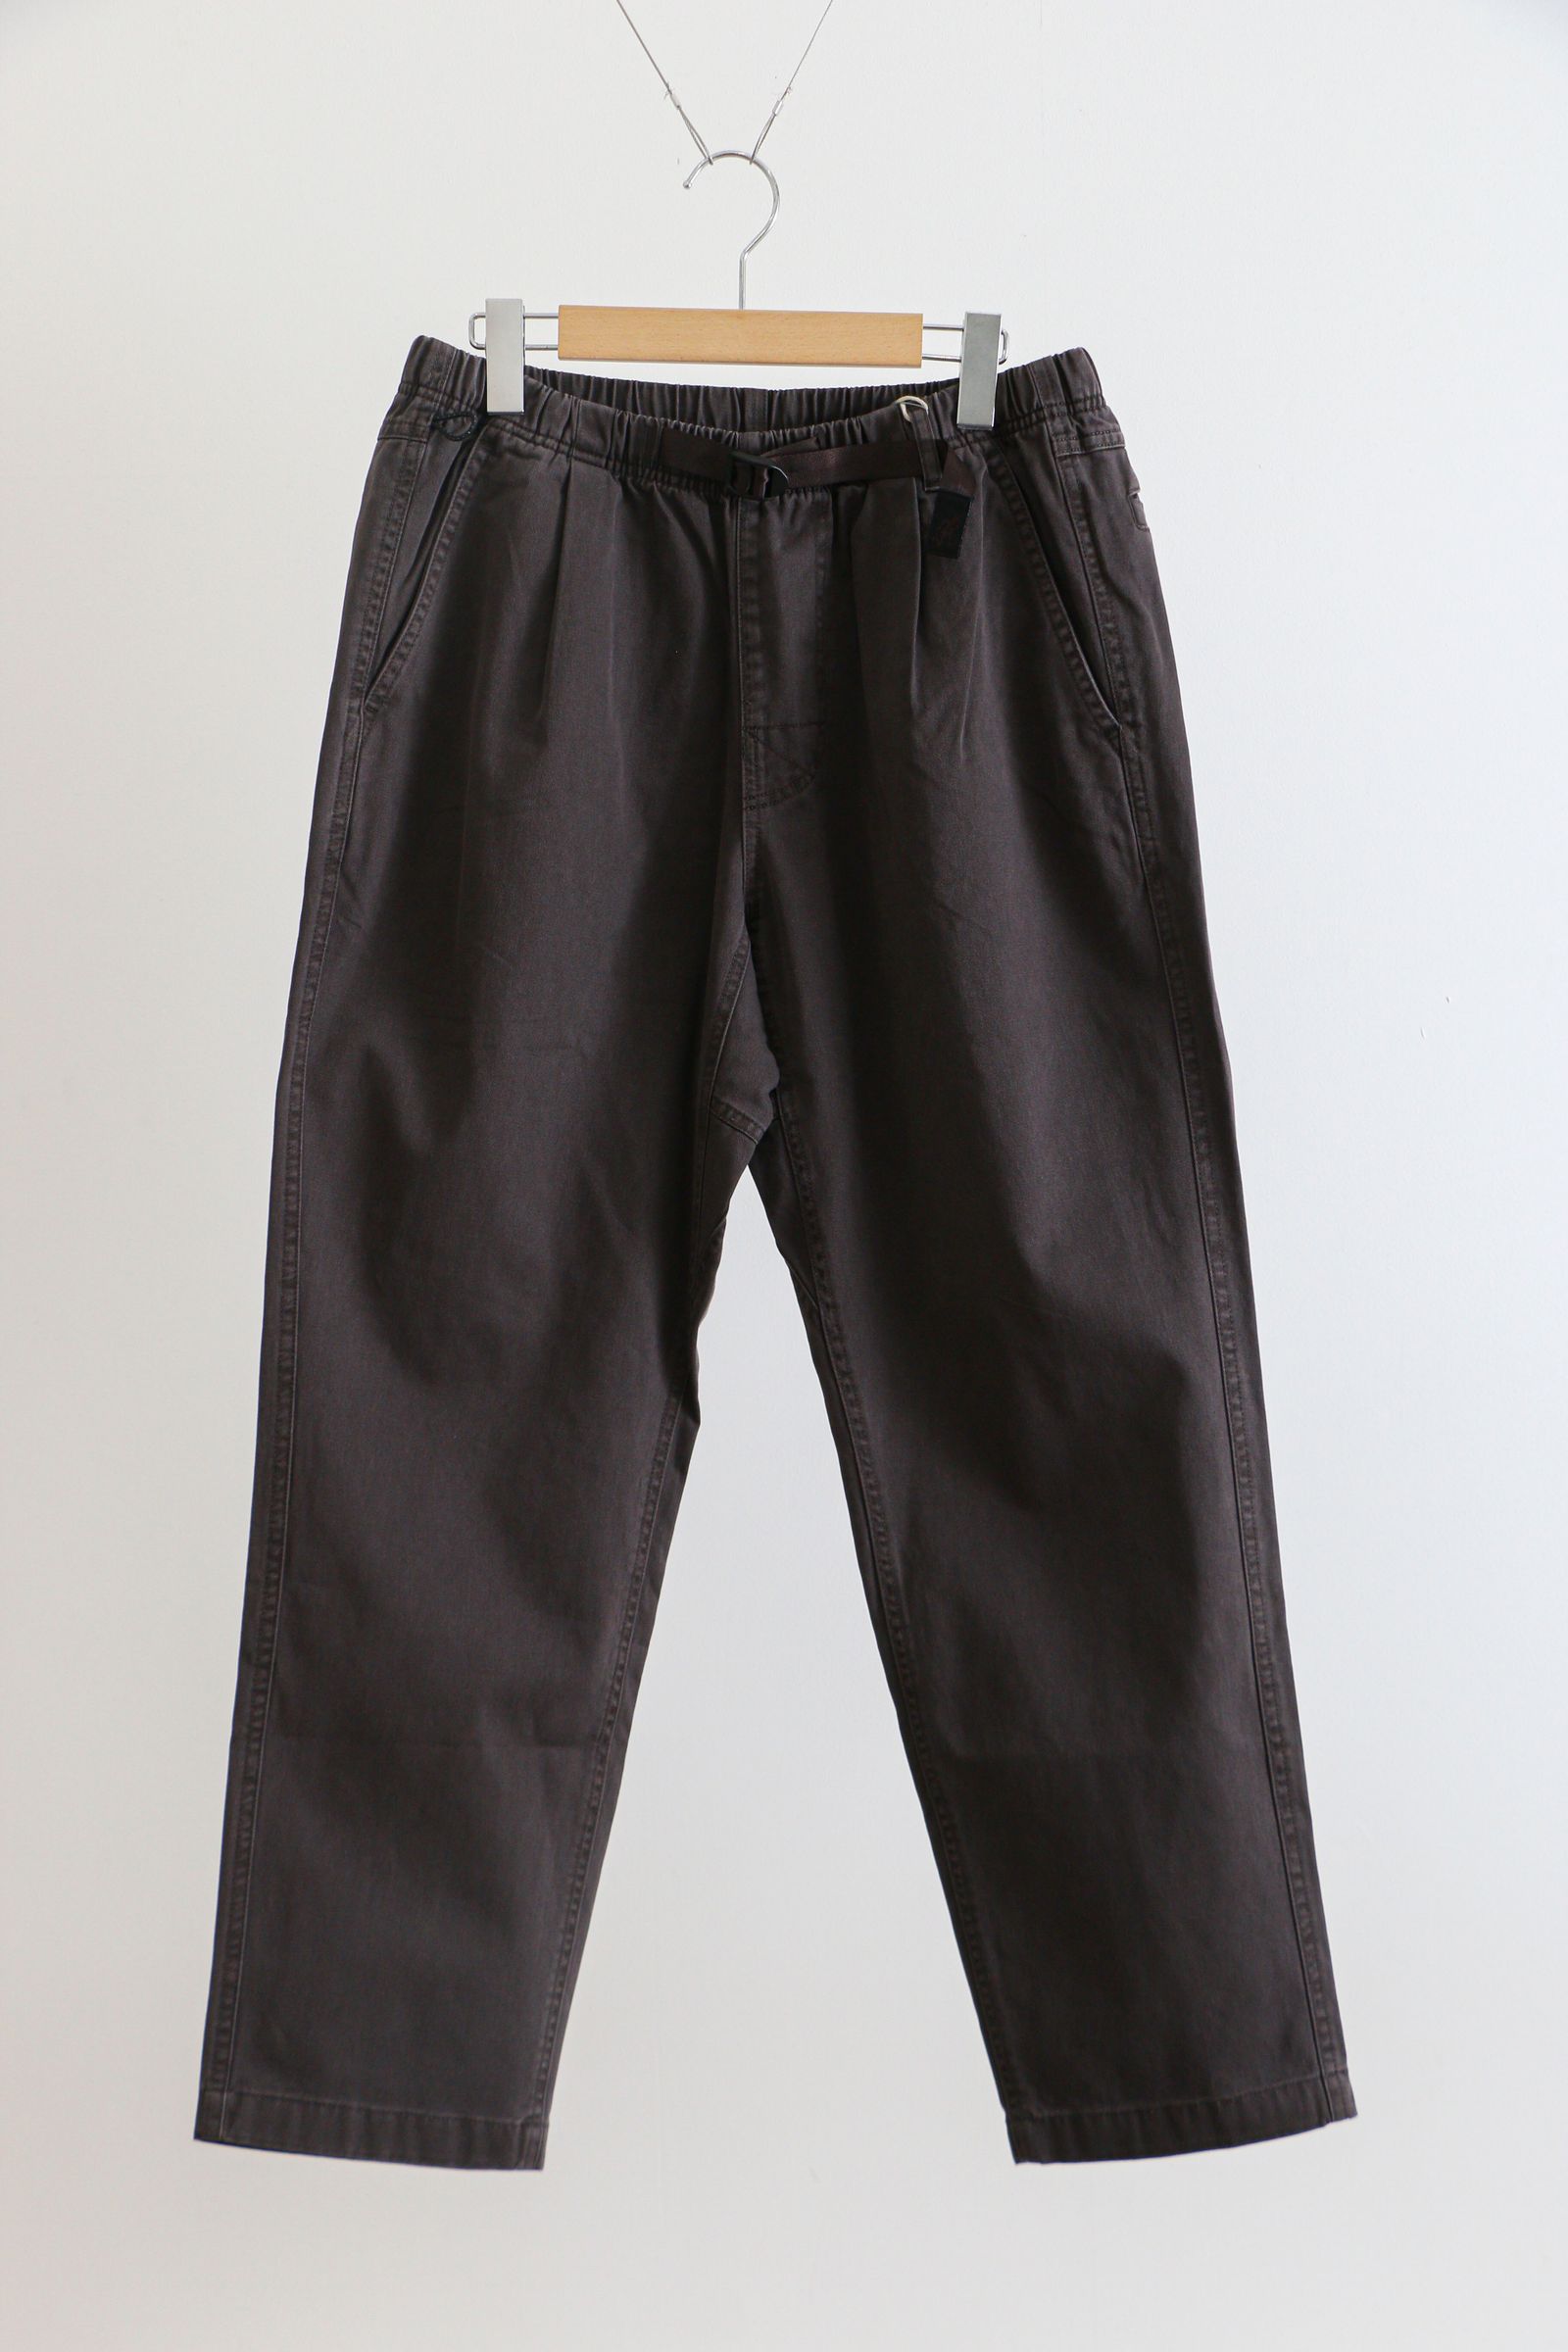 bal - BAL GRAMICCI PIGMENT DYED PANT COFFEE / グラミチ